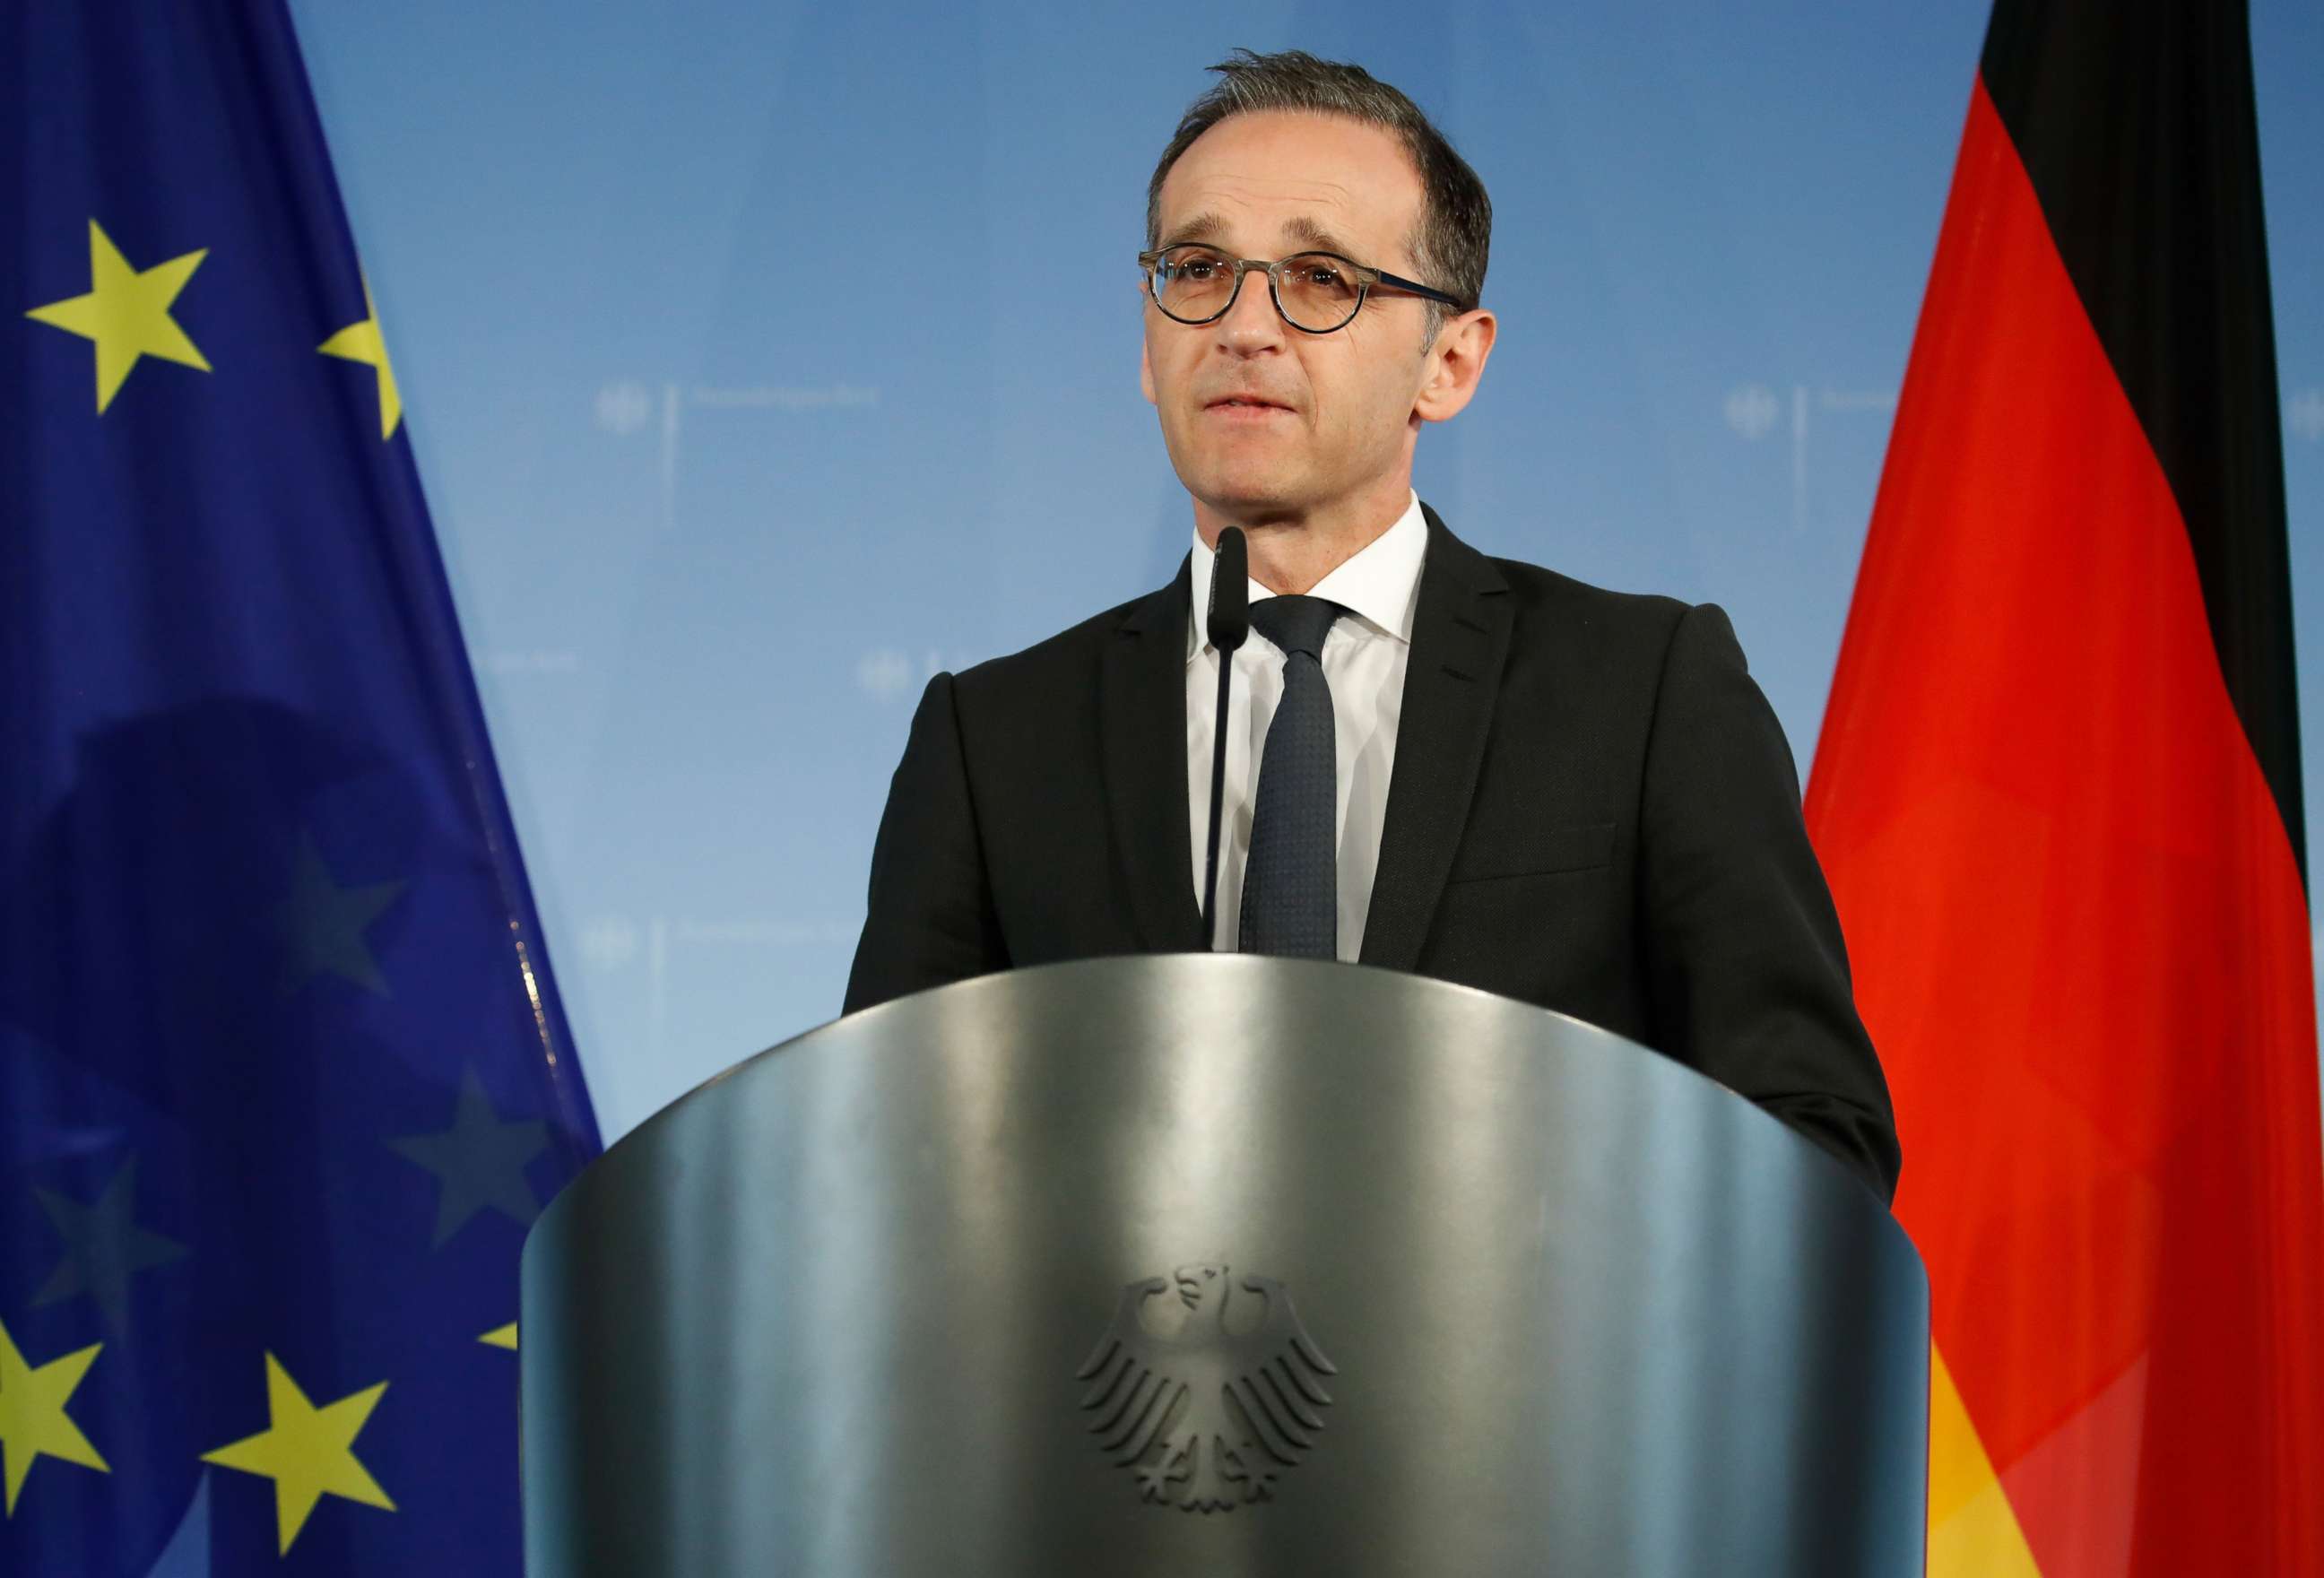 PHOTO: German Foreign Minister Heiko Maas gives a statement, May 9, 2018, in Berlin after US President Donald Trump pulled the United States out of a landmark deal curbing Iran's nuclear program and reimposed crippling sanctions.